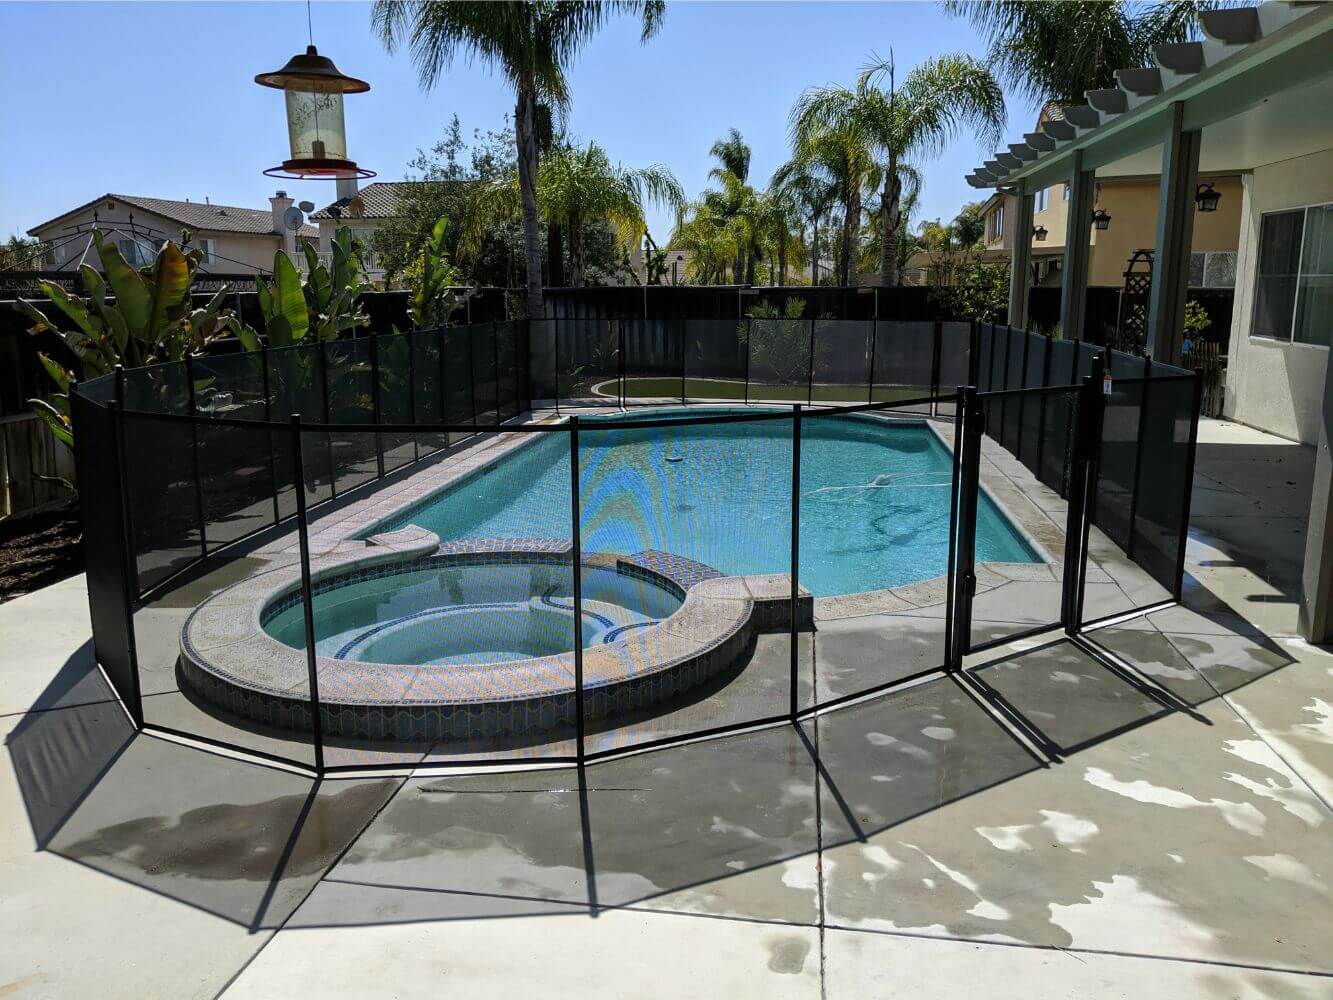 Black mesh swimming pool fence installed around a residential swimming pool